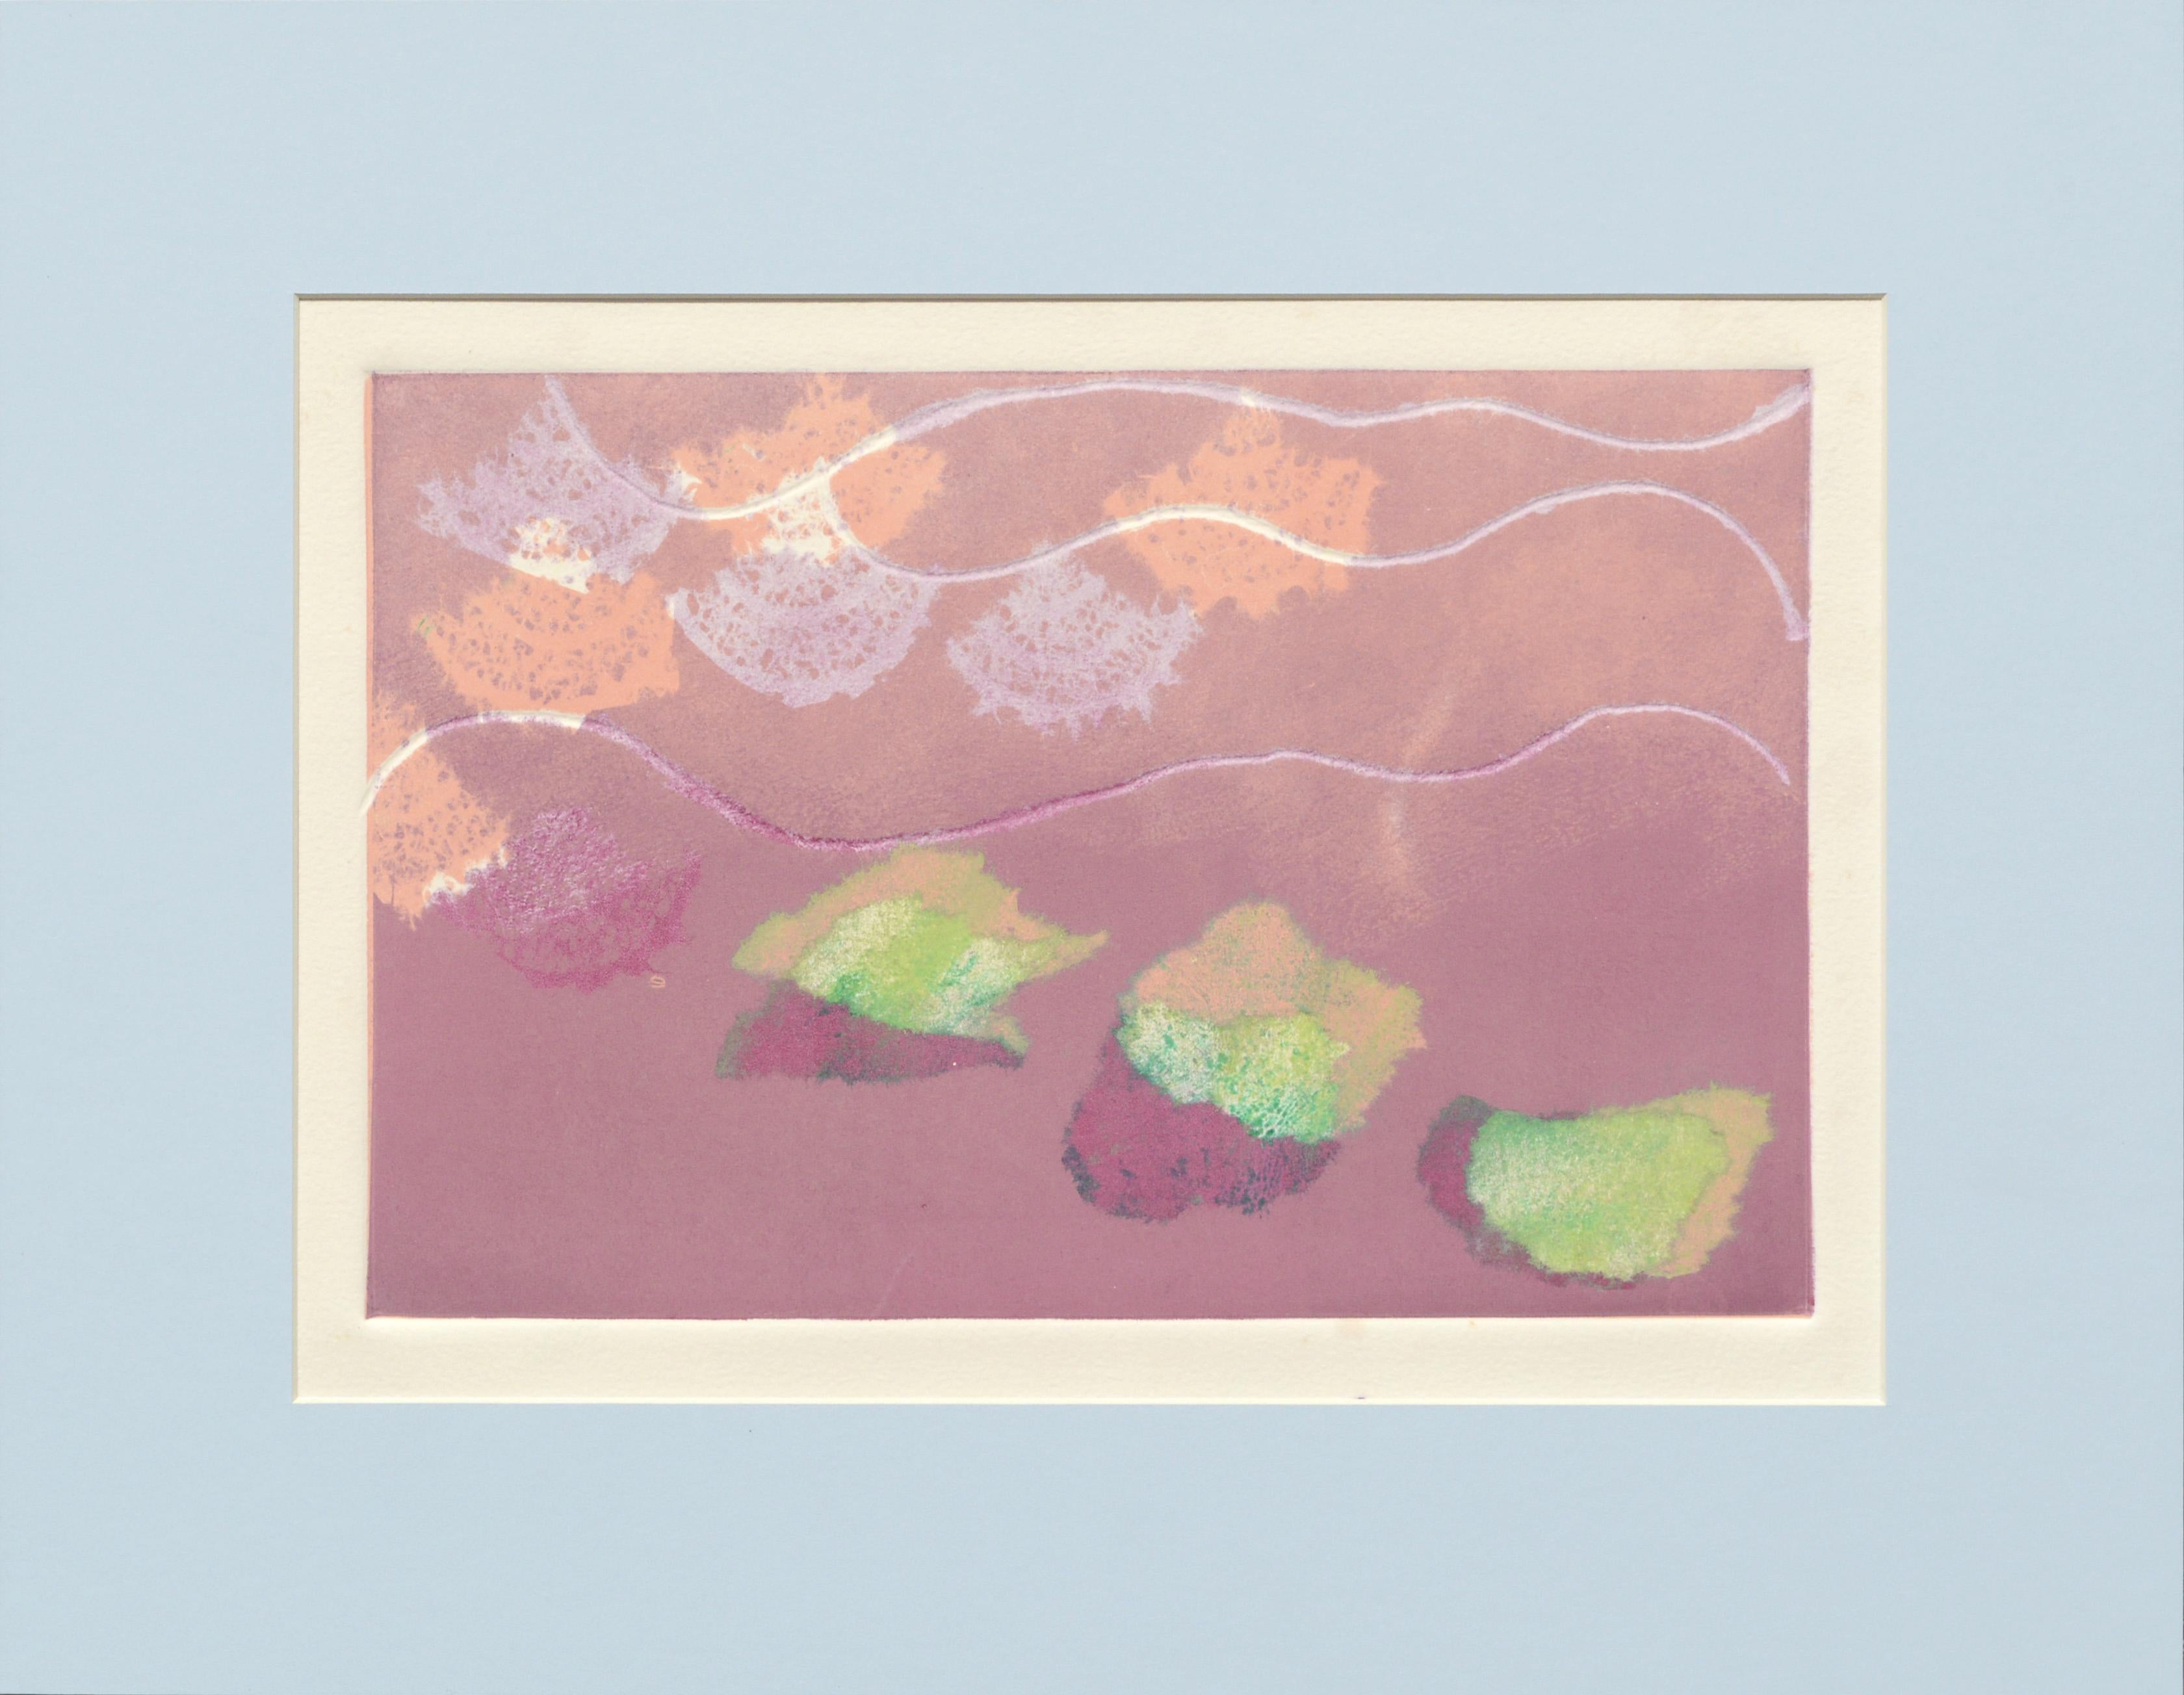 Abstract Print Patricia A Pearce - Feuilles et fans abstraits